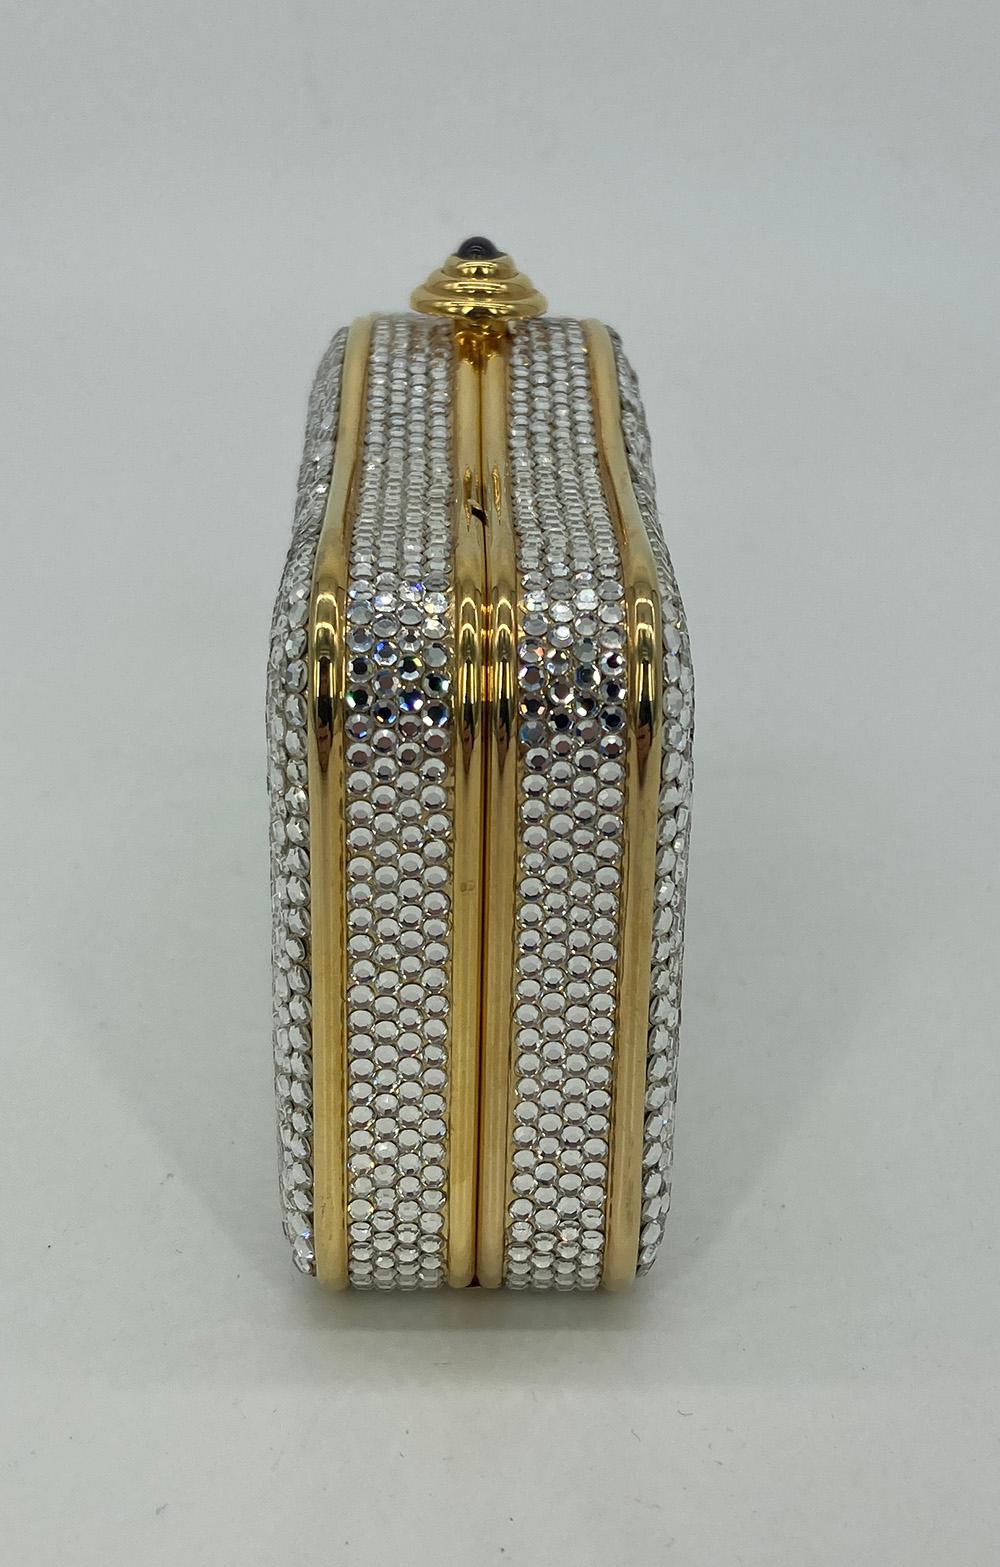 Judith Leiber Crystal Curved Top Small Minaudiere in excellent condition. clear crystals with gold hardware and purple gemstone top button closure. gold leather interior with attached gold chain shoulder strap. No stains smells or missing crystals.